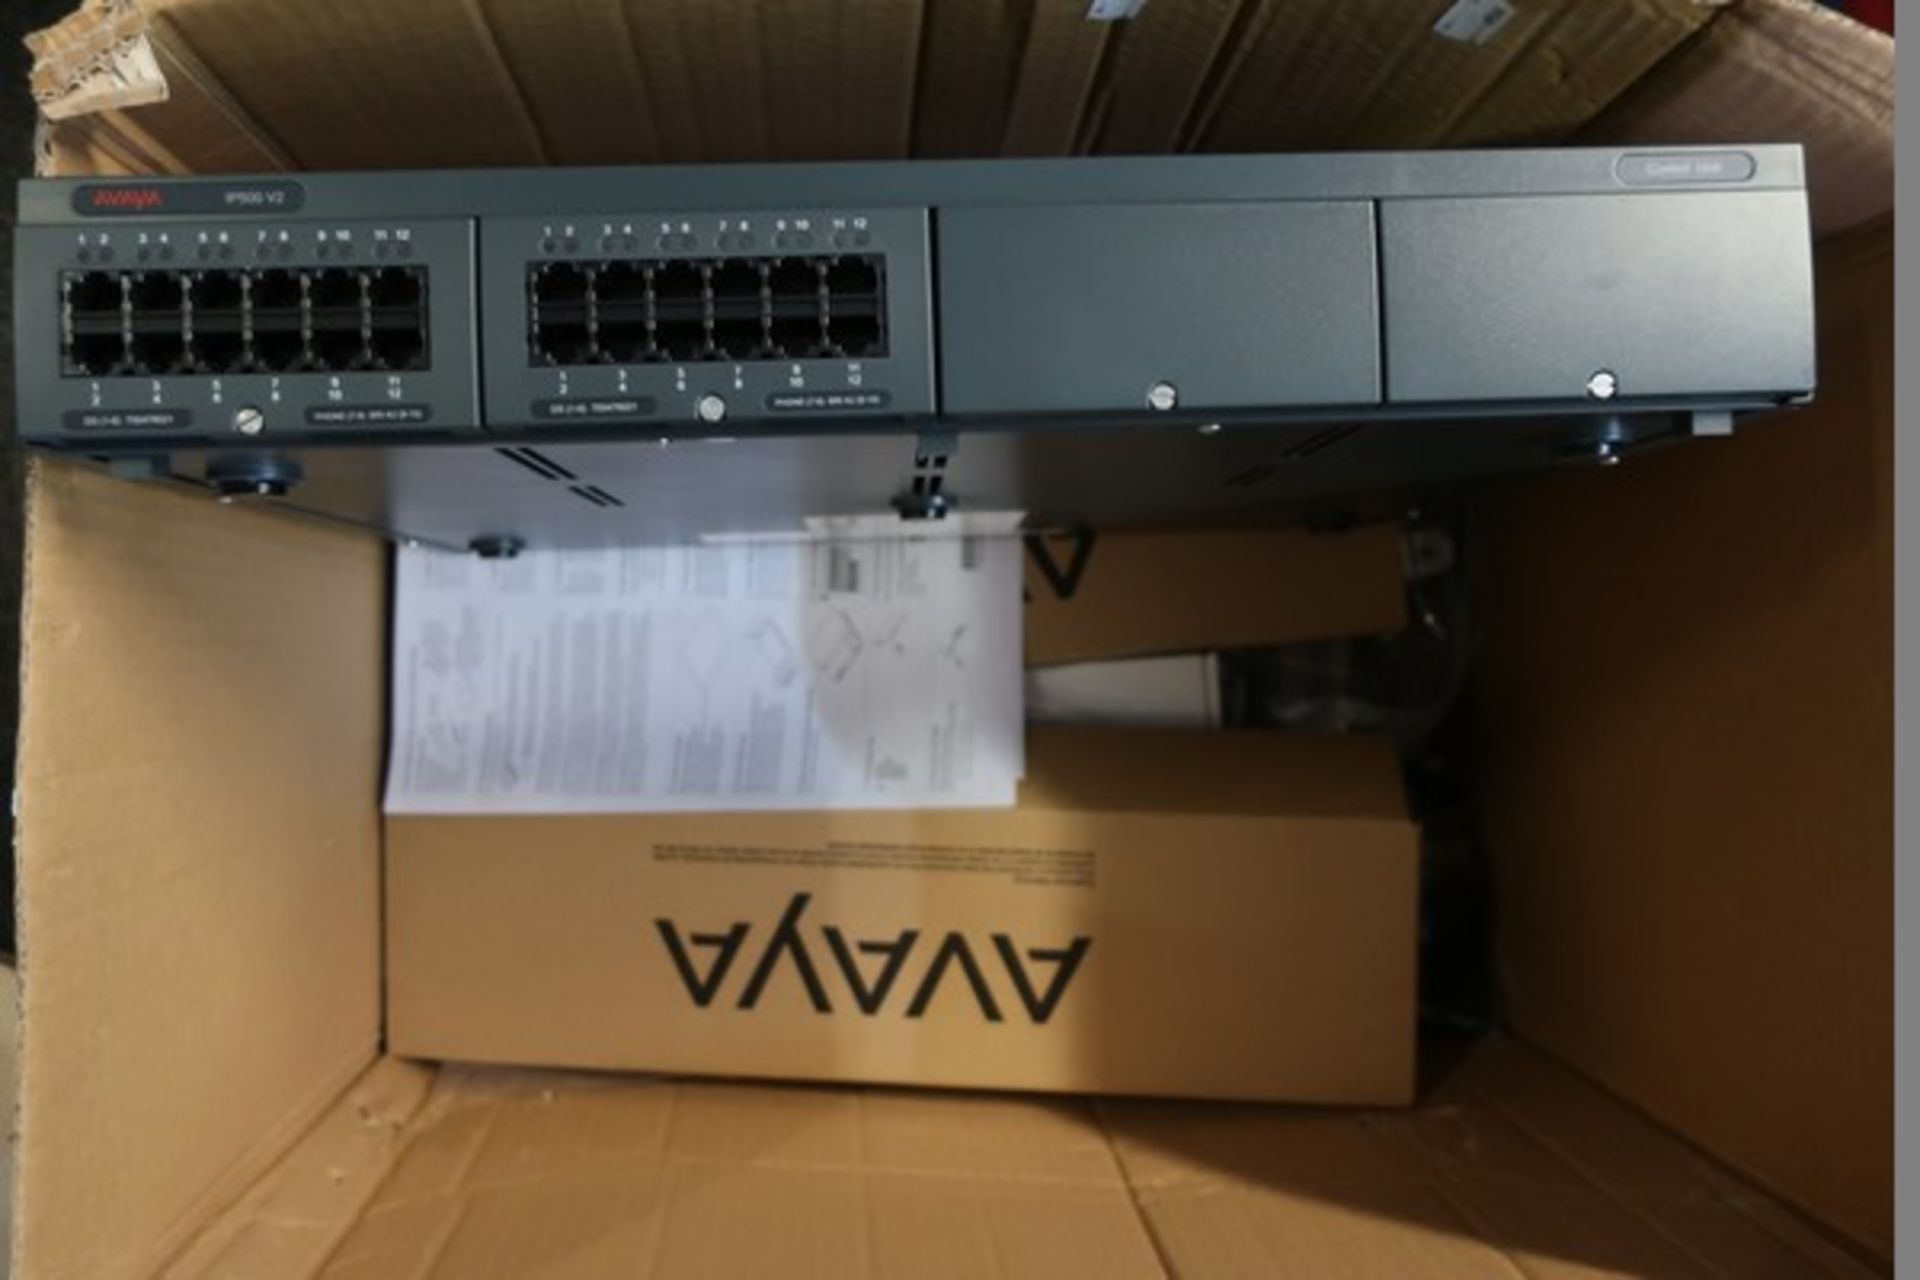 An AVAYA IP500 V2 control unit and other relevant items.